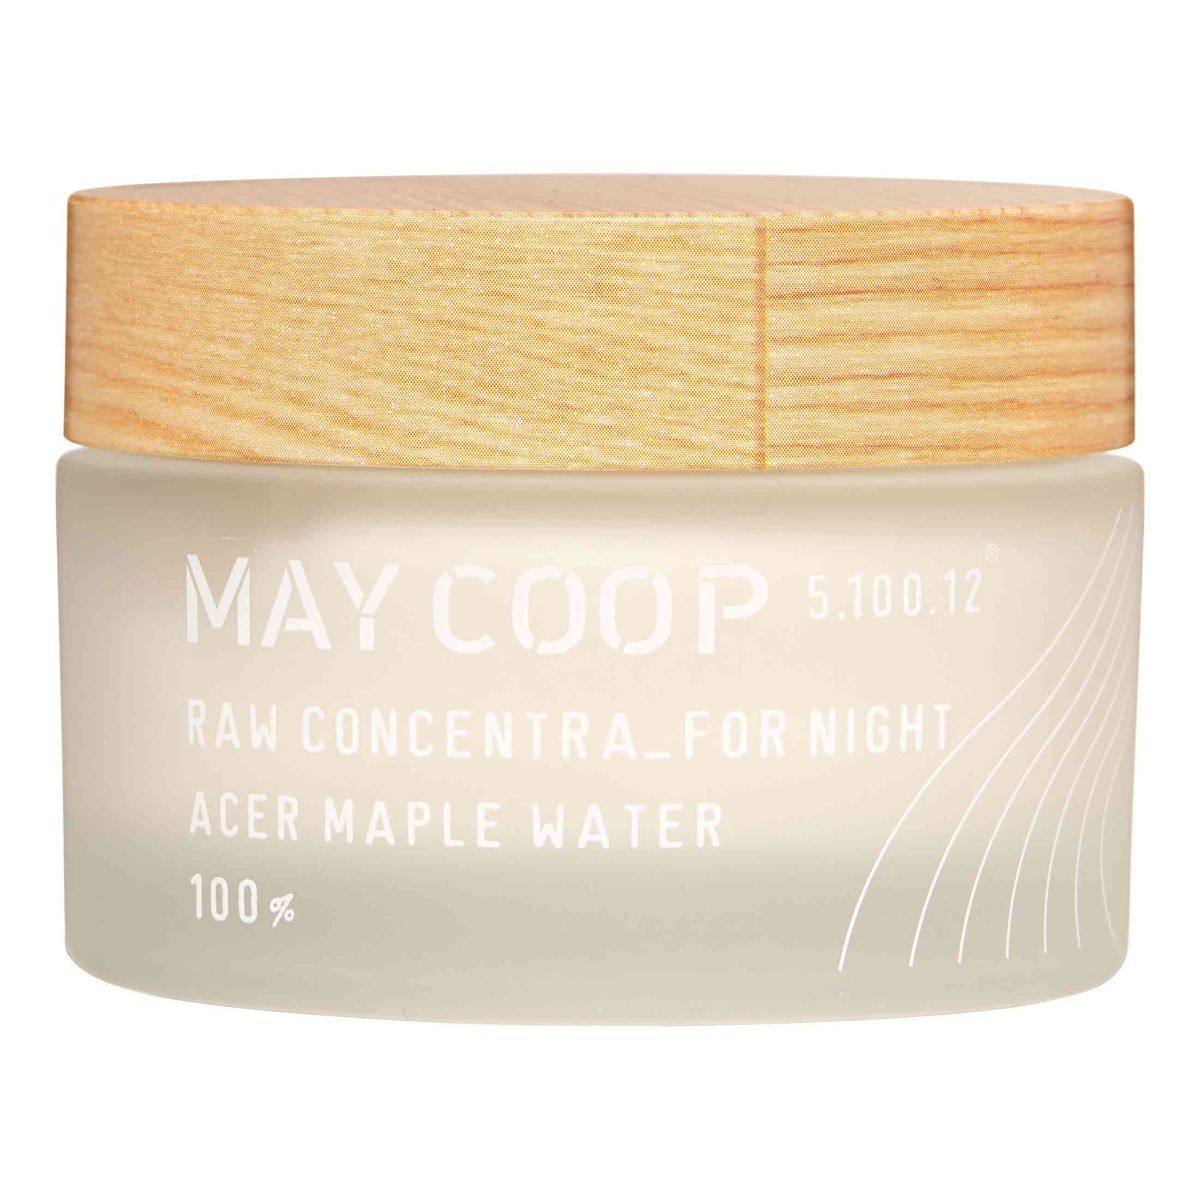 May Coop Raw Concentrate Night Cream